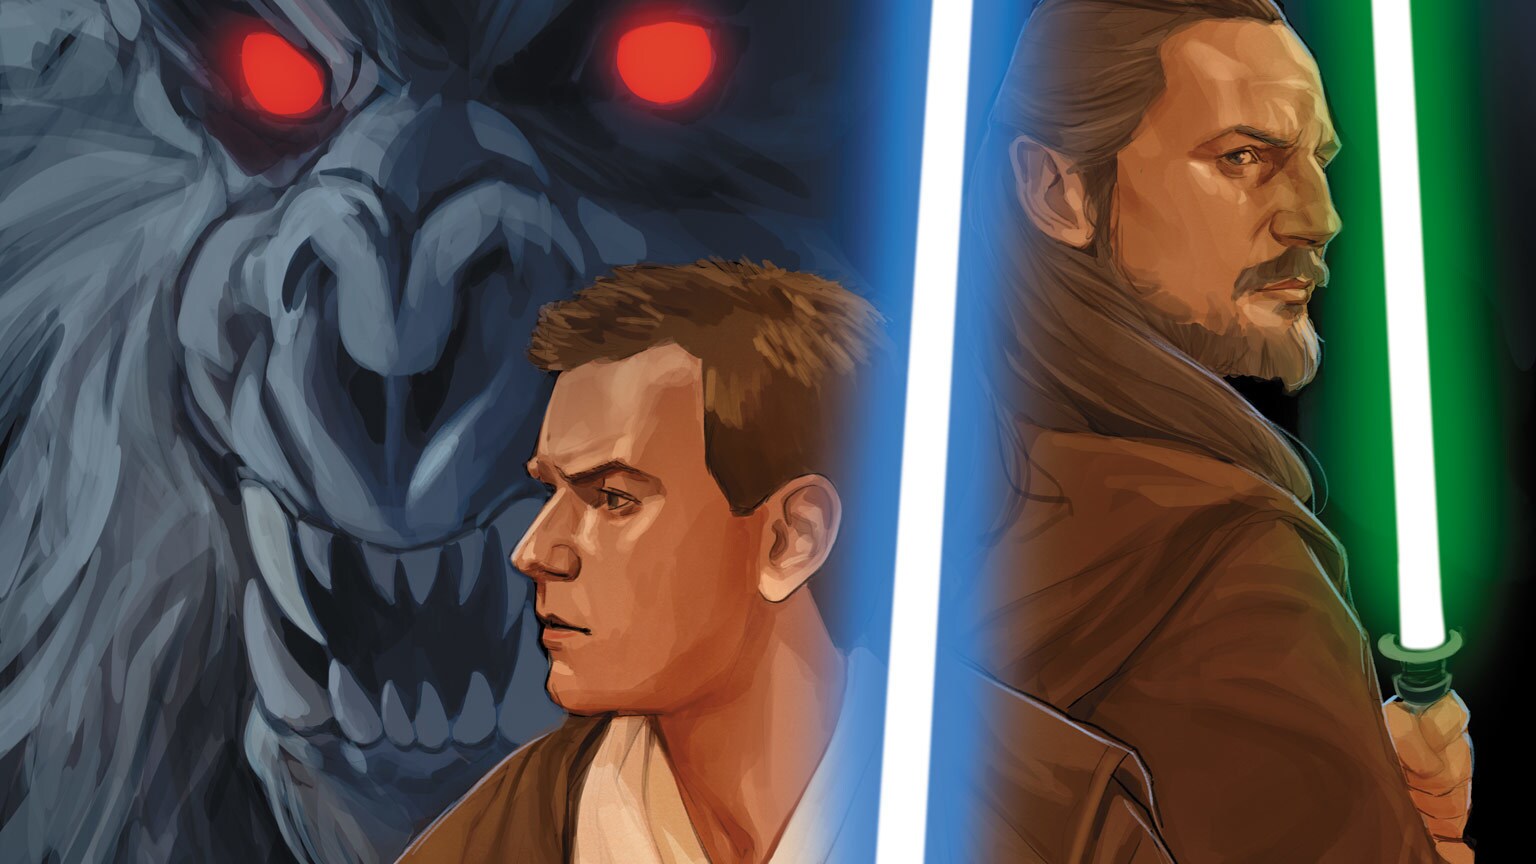 Obi-Wan and Qui-Gon Step Inside Darkness in Marvel’s Star Wars: Obi-Wan #2 - Exclusive Preview